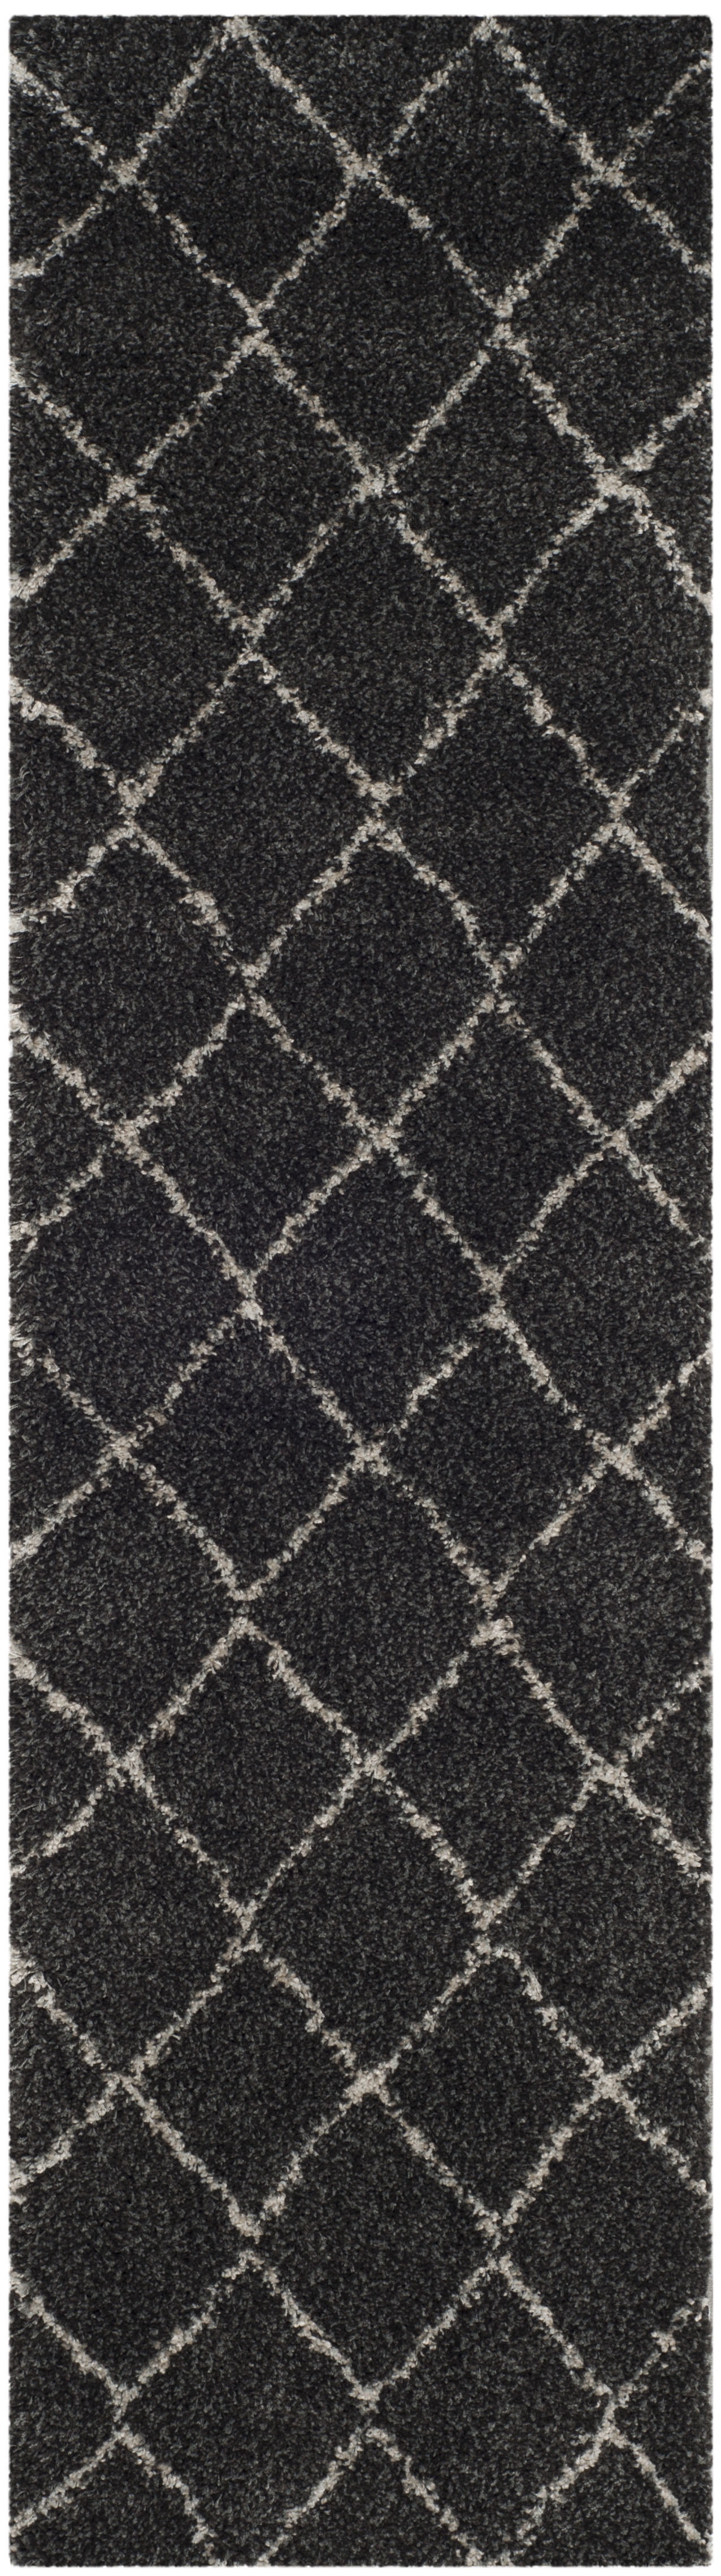 Arlo Home Woven Area Rug, ASG742C, Anthracite/Beige,  2' 3" X 8' - Image 0